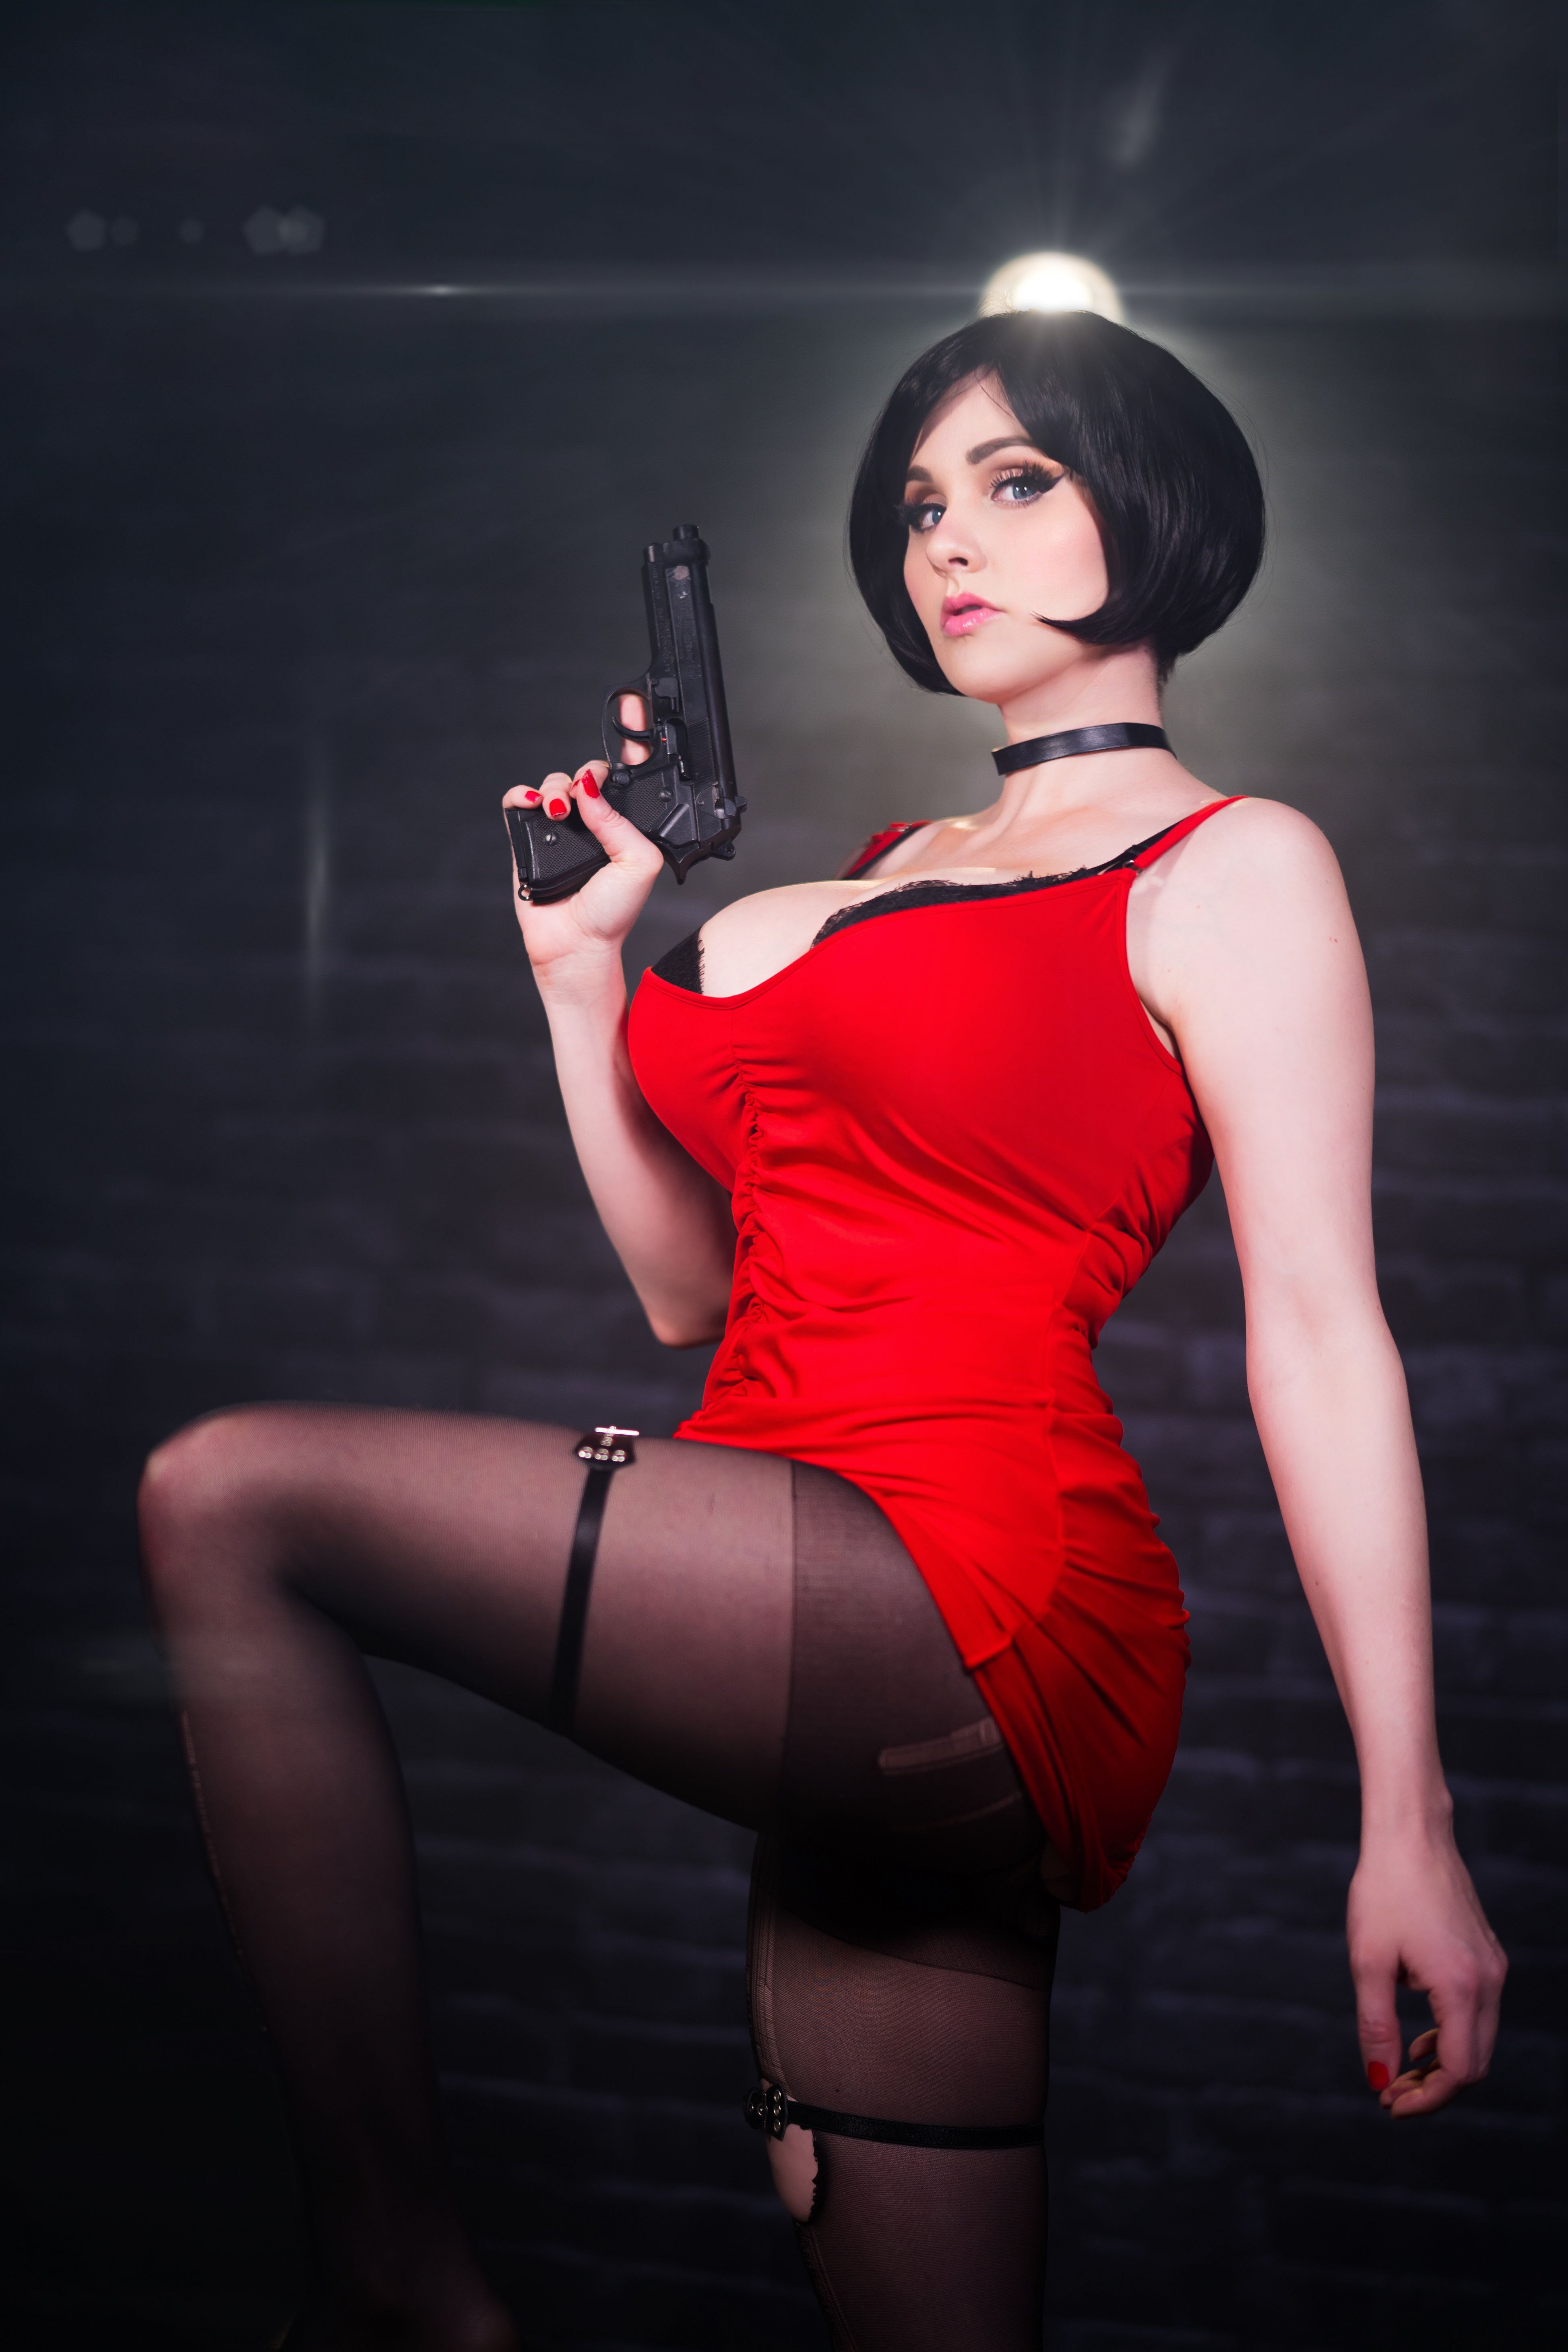 Angie Griffin - Ada wong